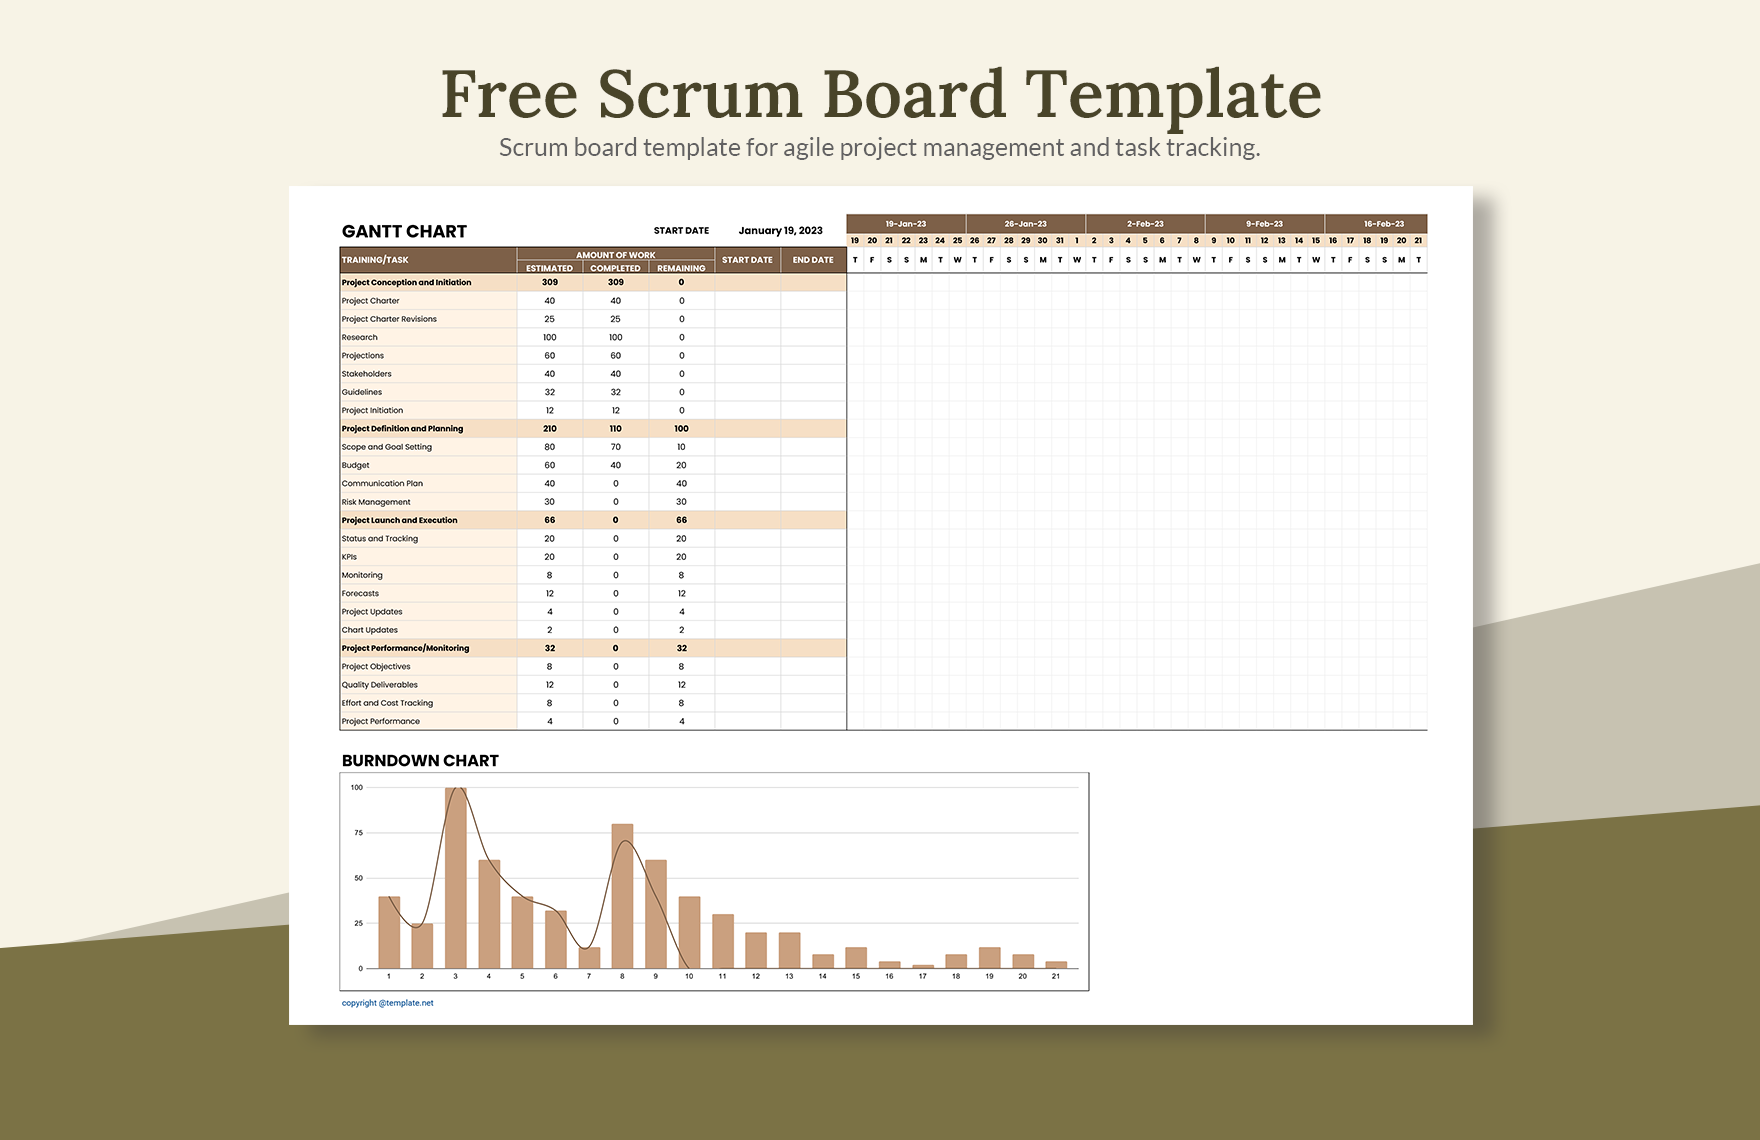 Free Scrum Board Template Download in Excel Google Sheets Template net